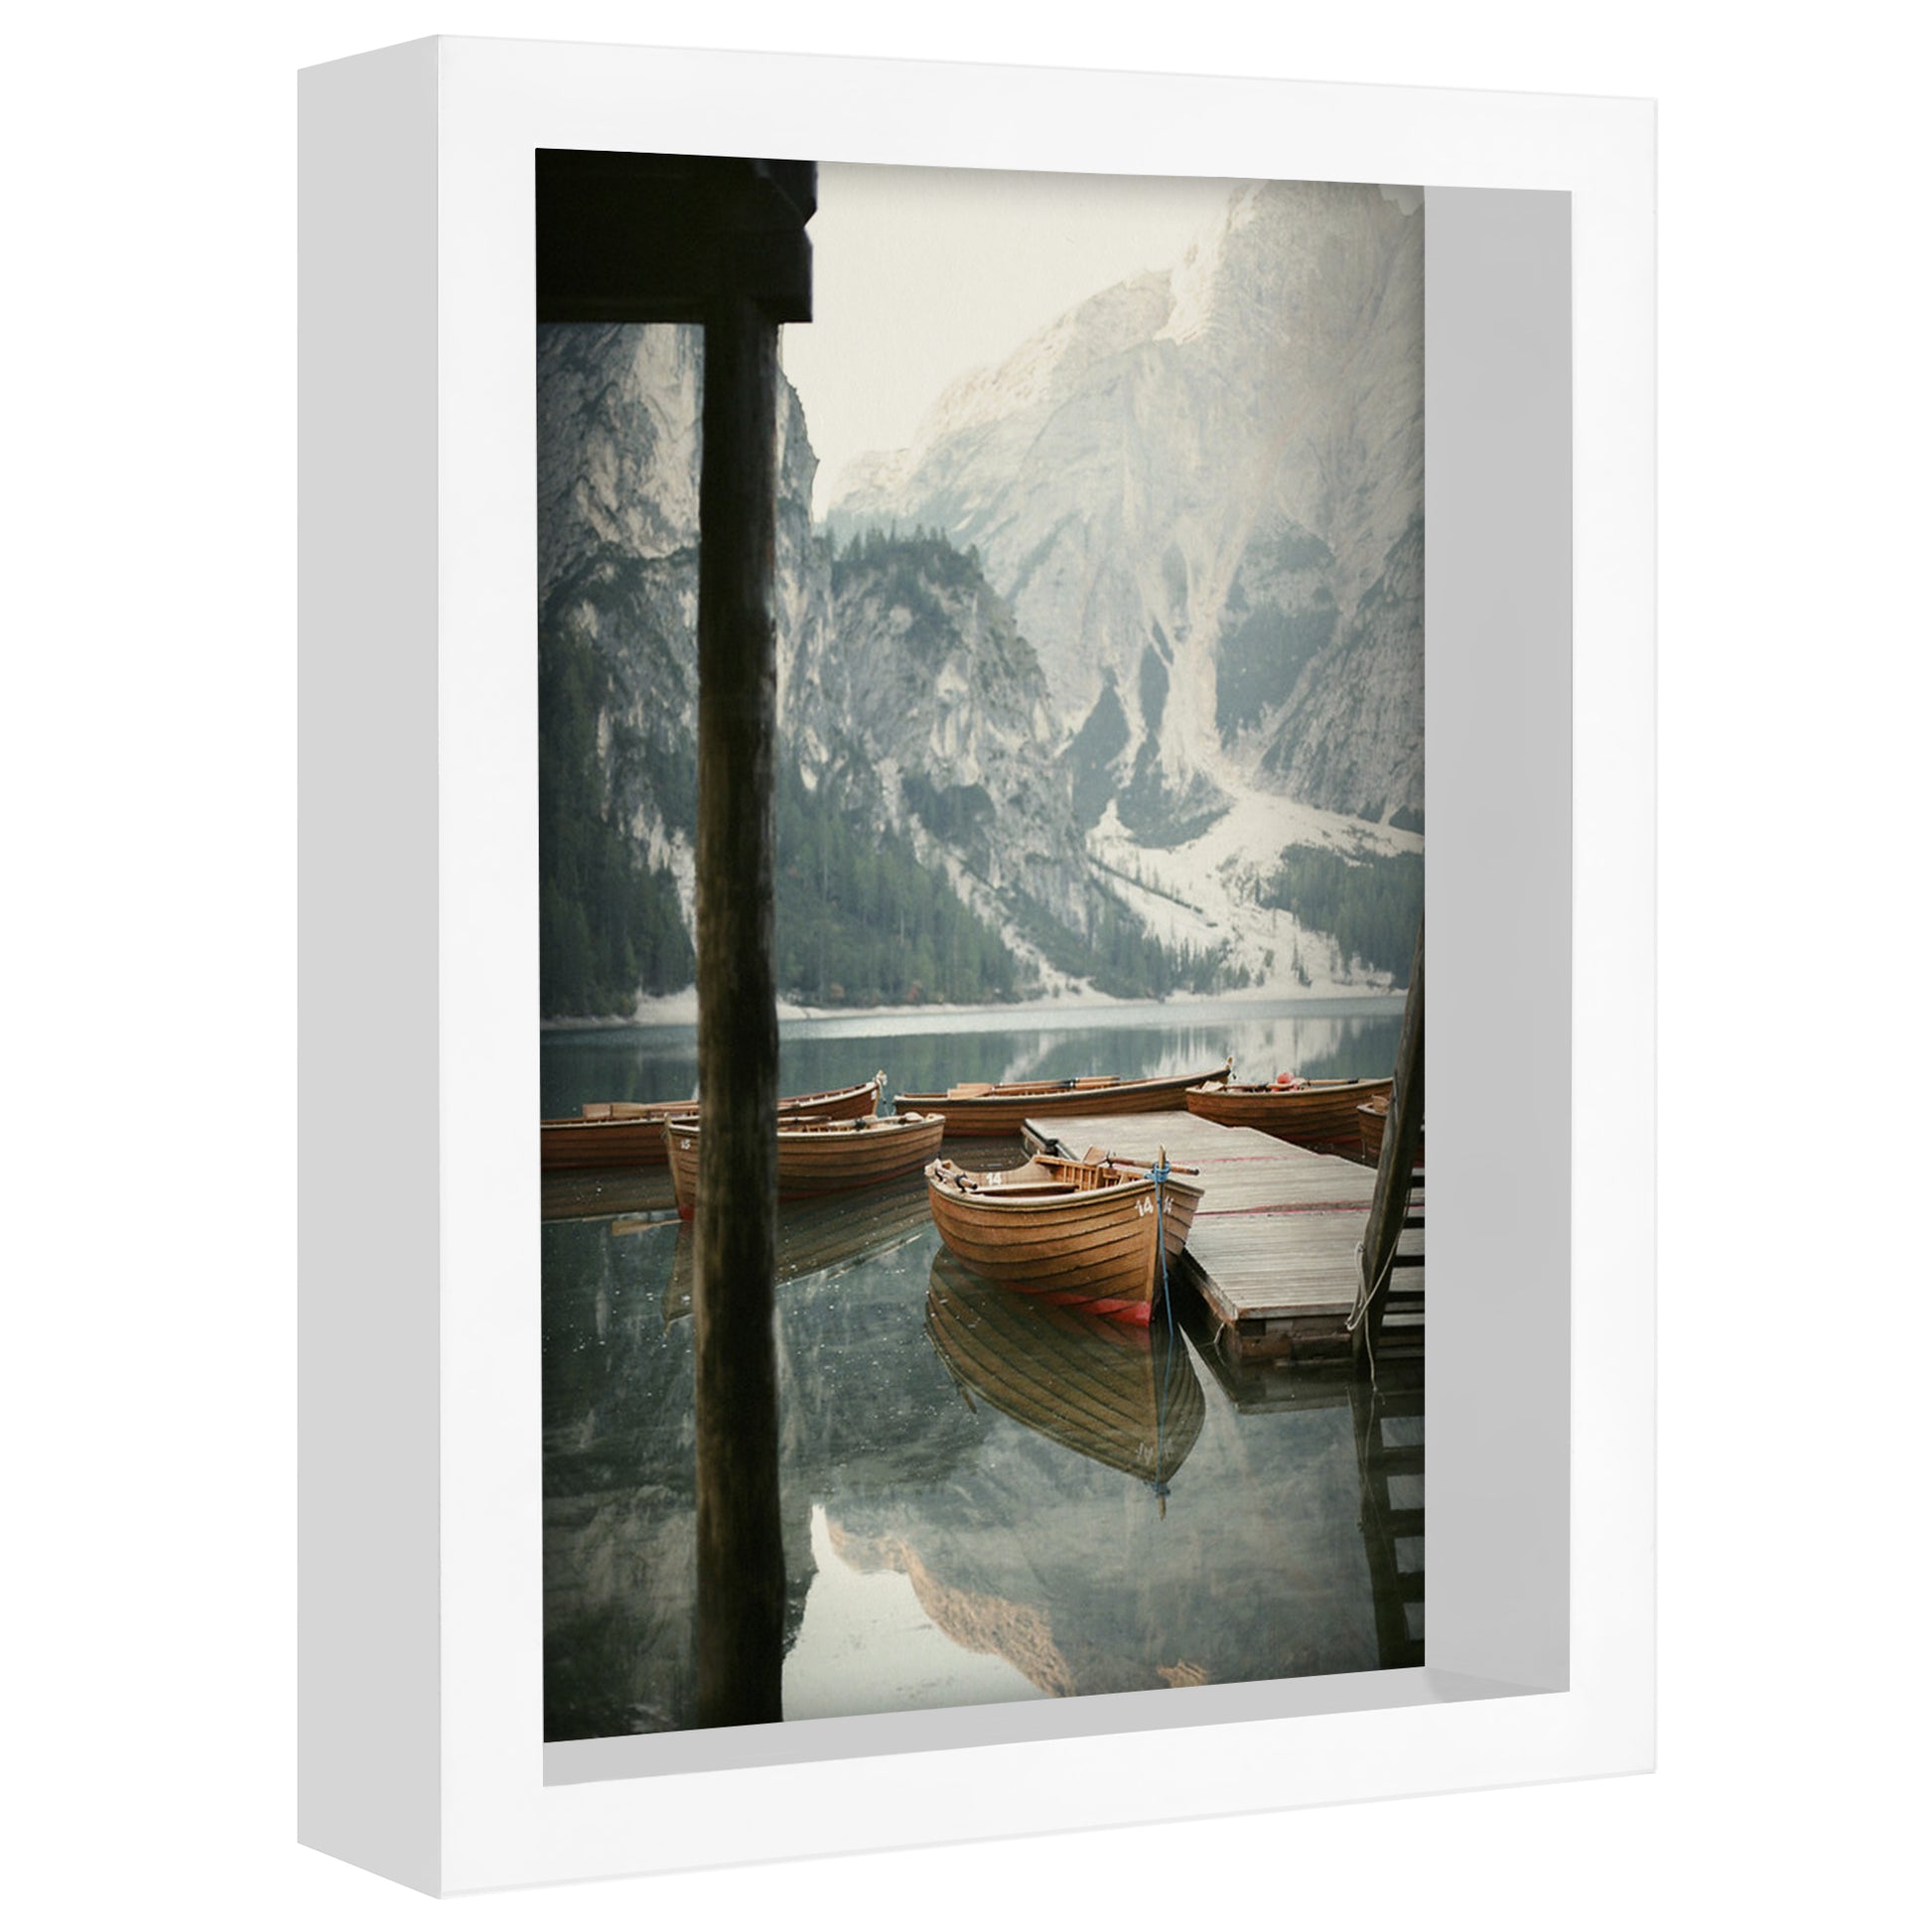 Paradise From Above - 6 Piece Shadowbox Frame Gallery Wall Art Set - Americanflat